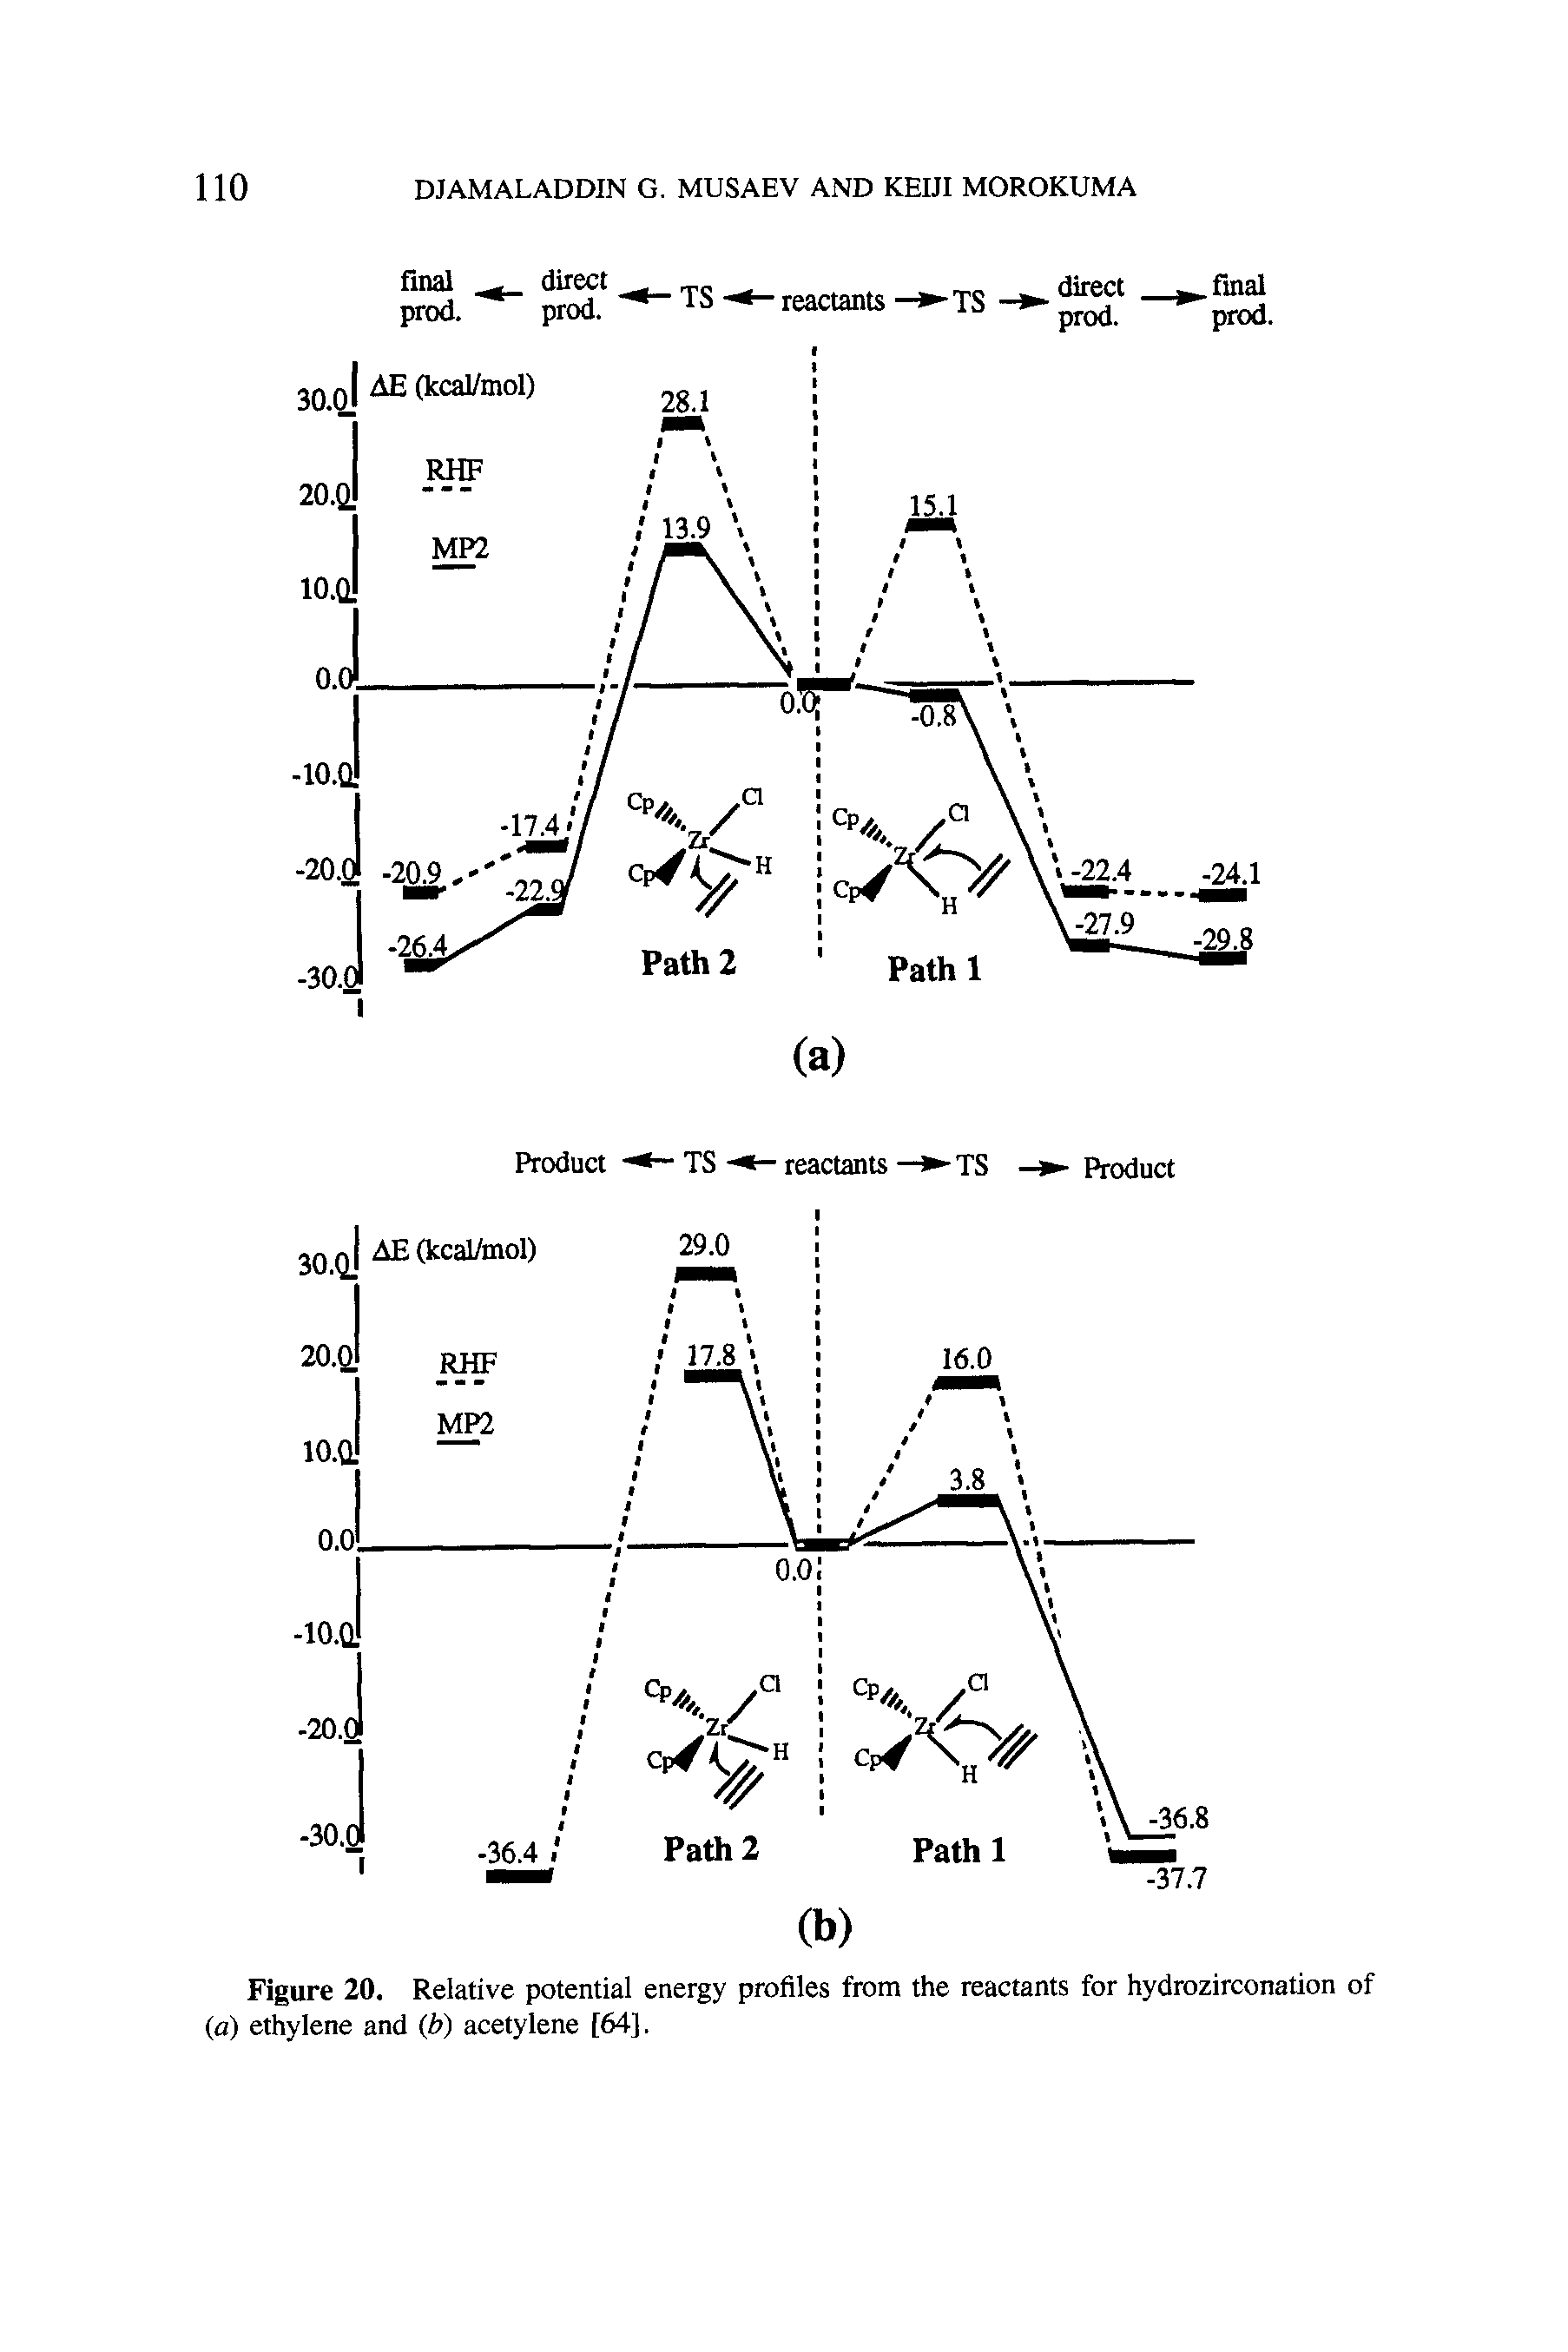 Figure 20. Relative potential energy profiles from the reactants for hydrozirconation of (a) ethylene and (b) acetylene [64],...